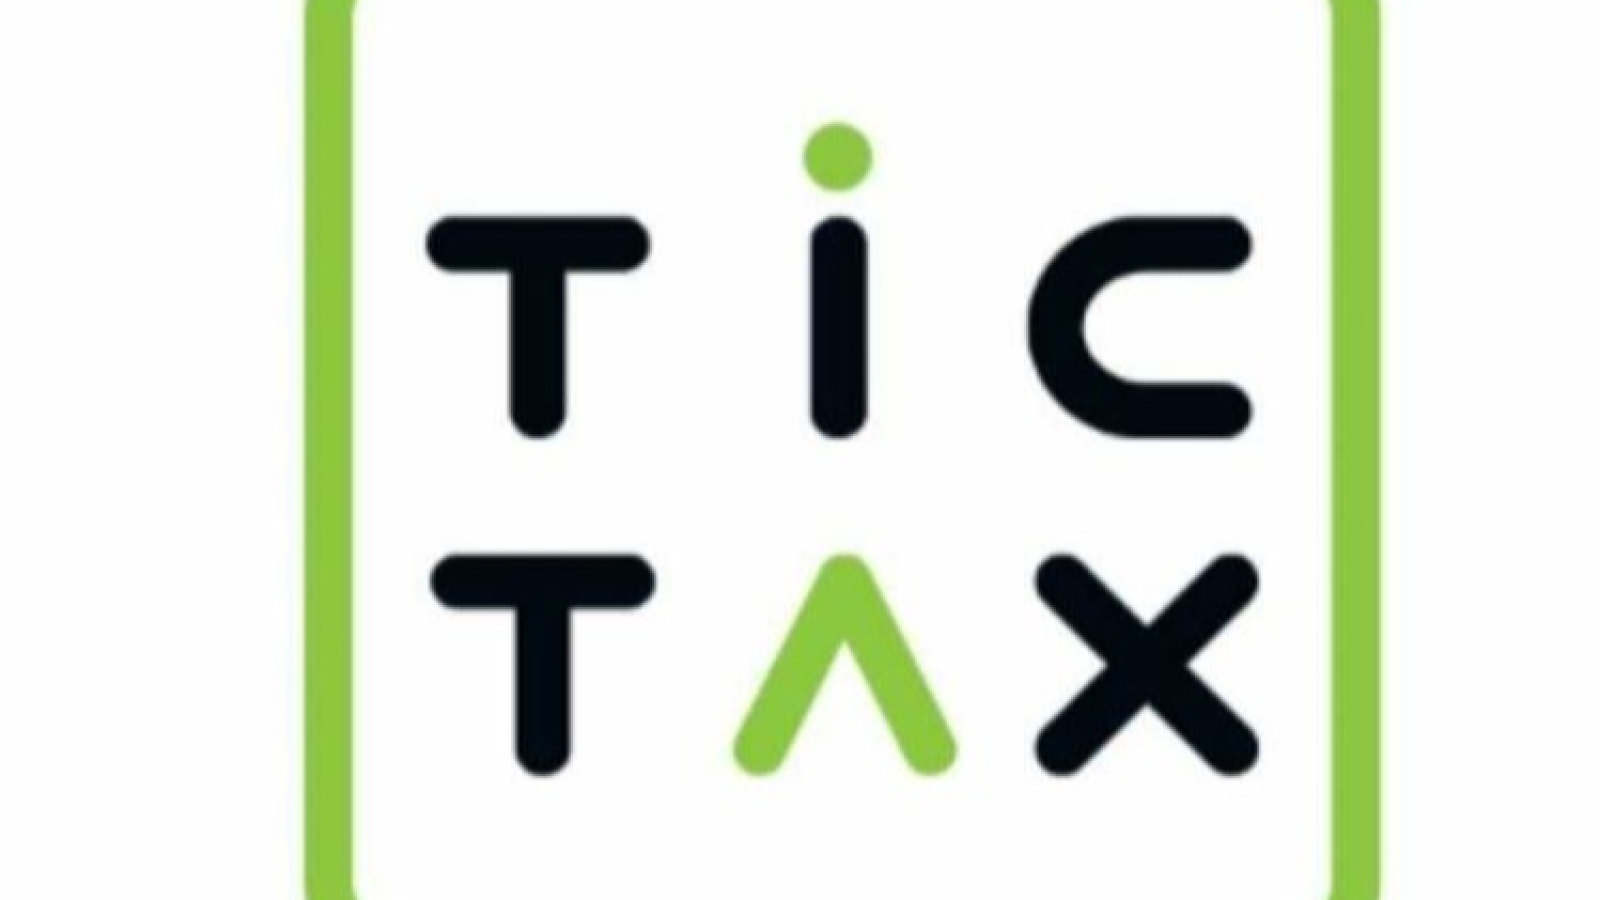 TicTax and Business Services Llc. 